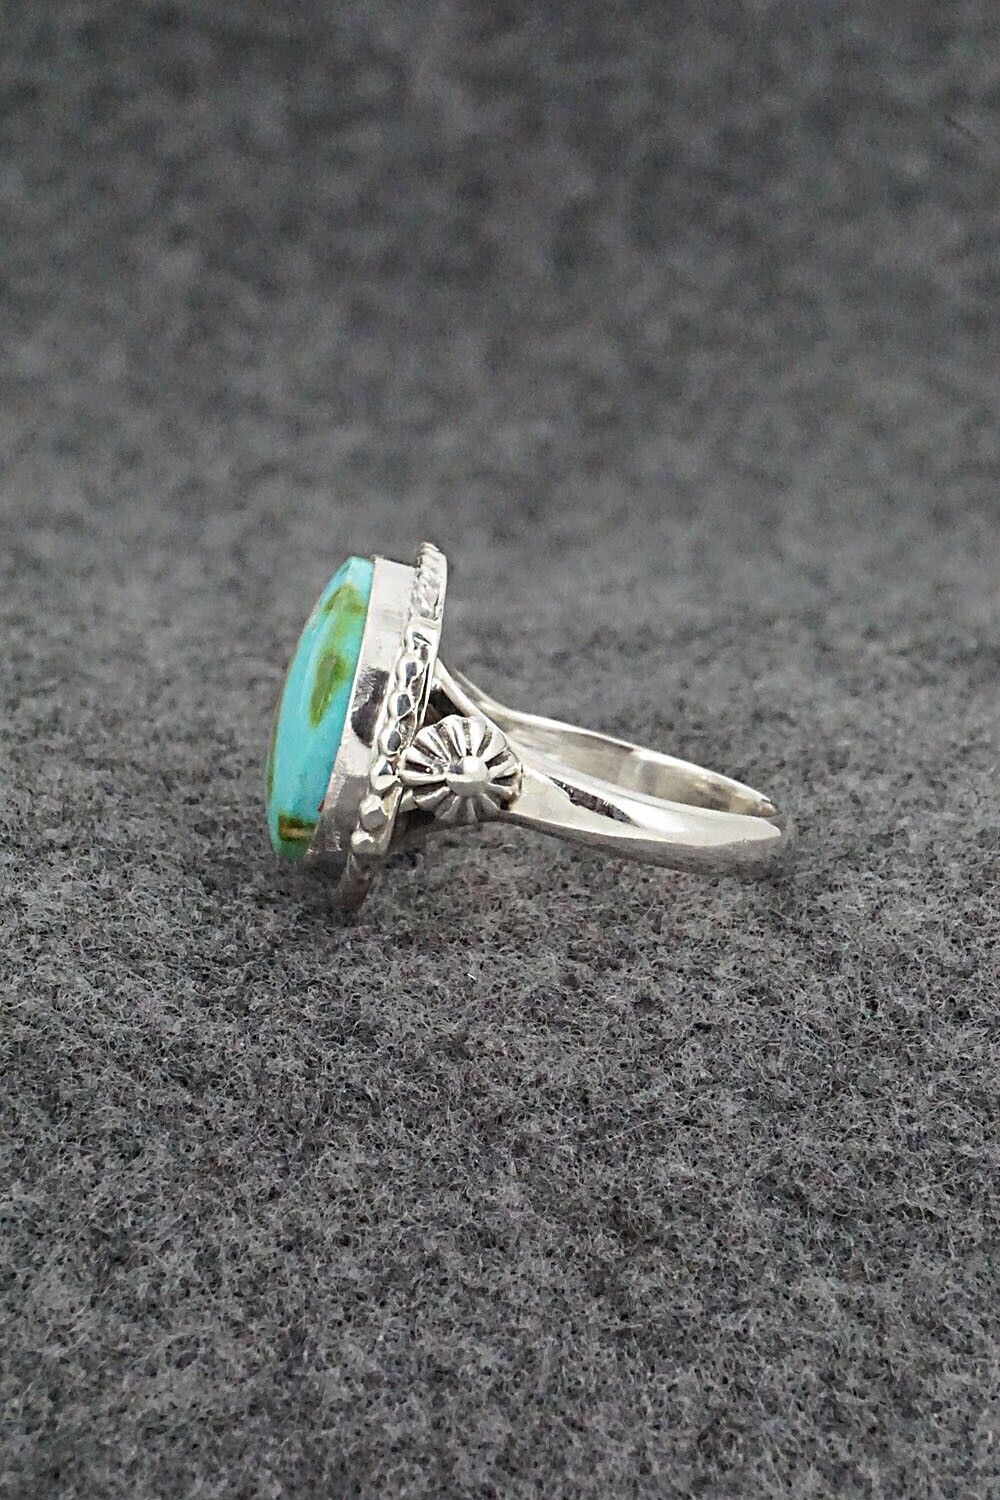 Turquoise & Sterling Silver Ring - Andrew Vandever - Size 7.75